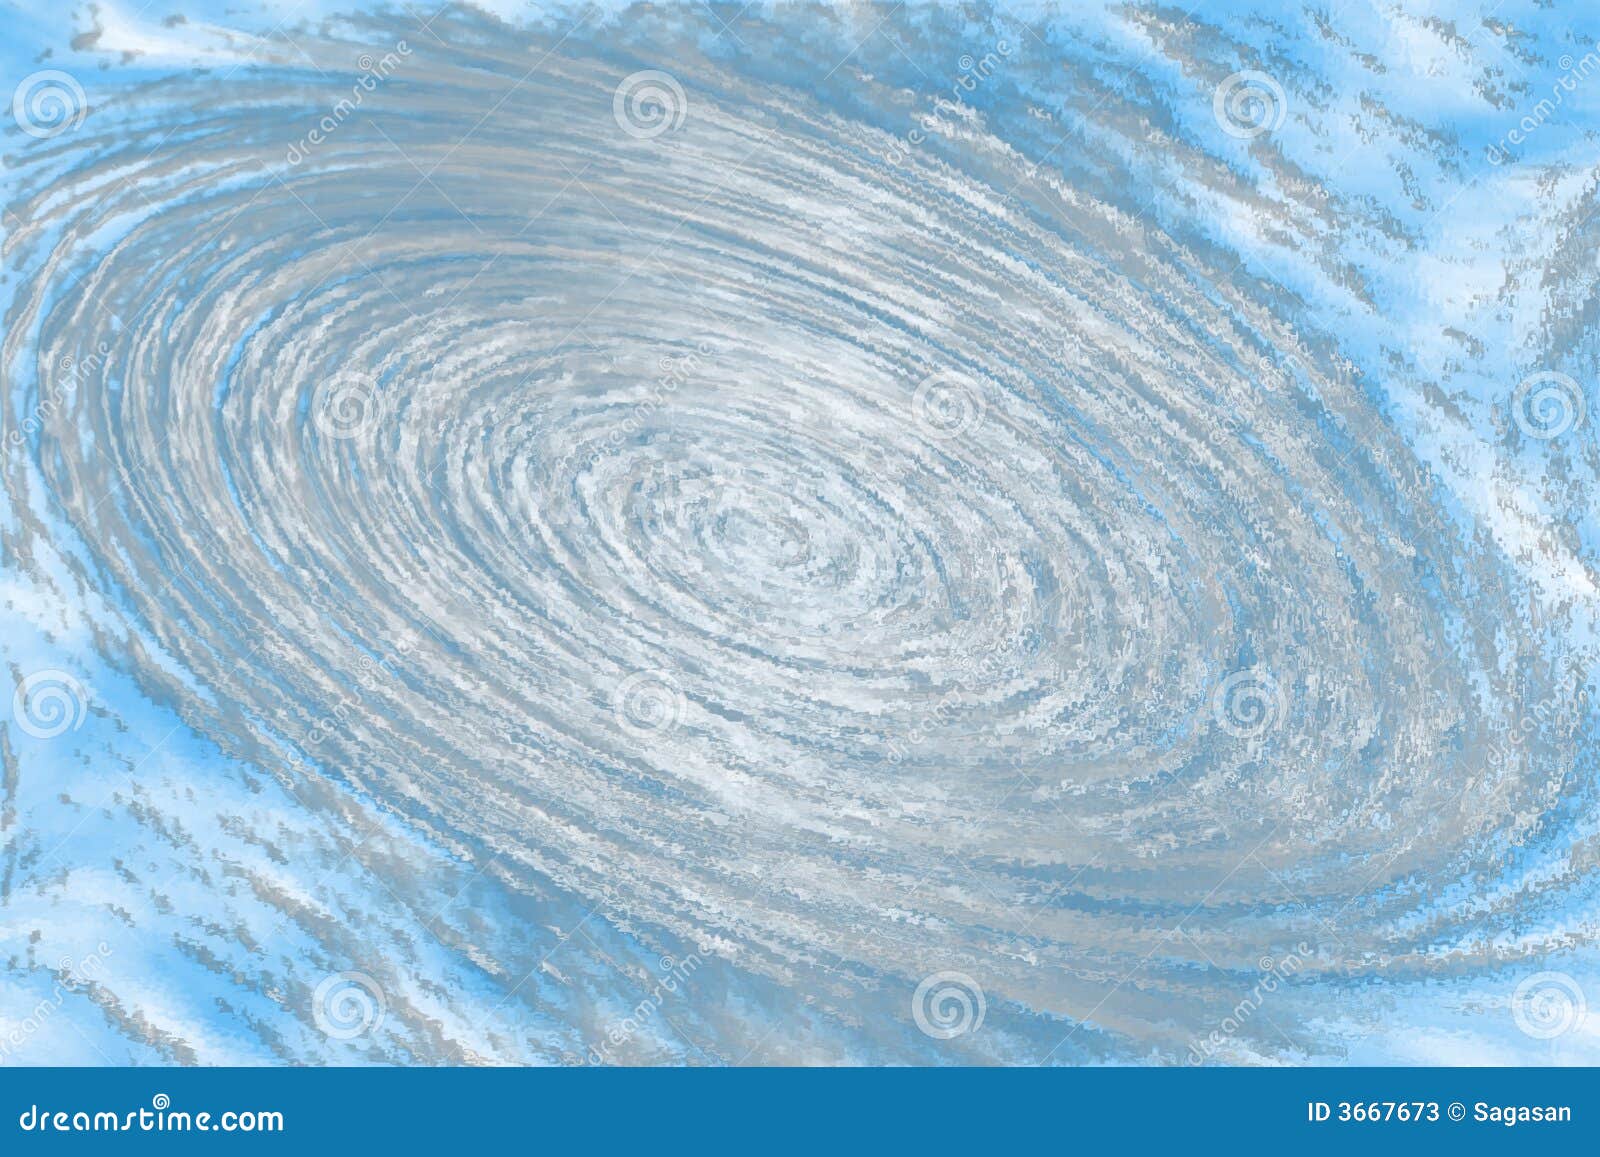 Big Image  Drawing Of Cyclone Transparent PNG  1892x2286  Free Download  on NicePNG